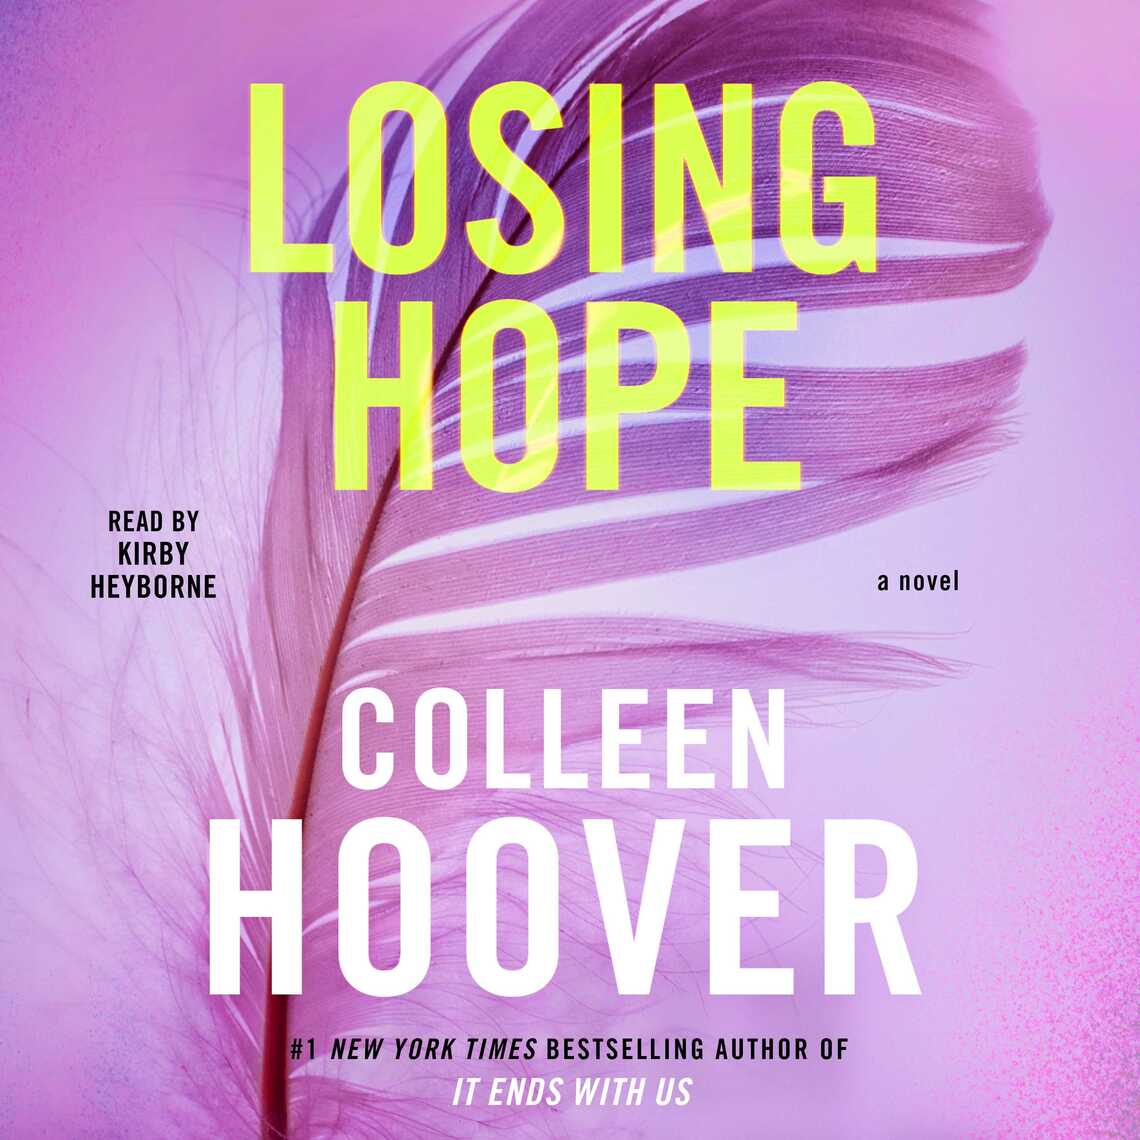 Colleen Hoover writes charming, addictive novels. Her own rags-to-riches  story reads like a bestseller